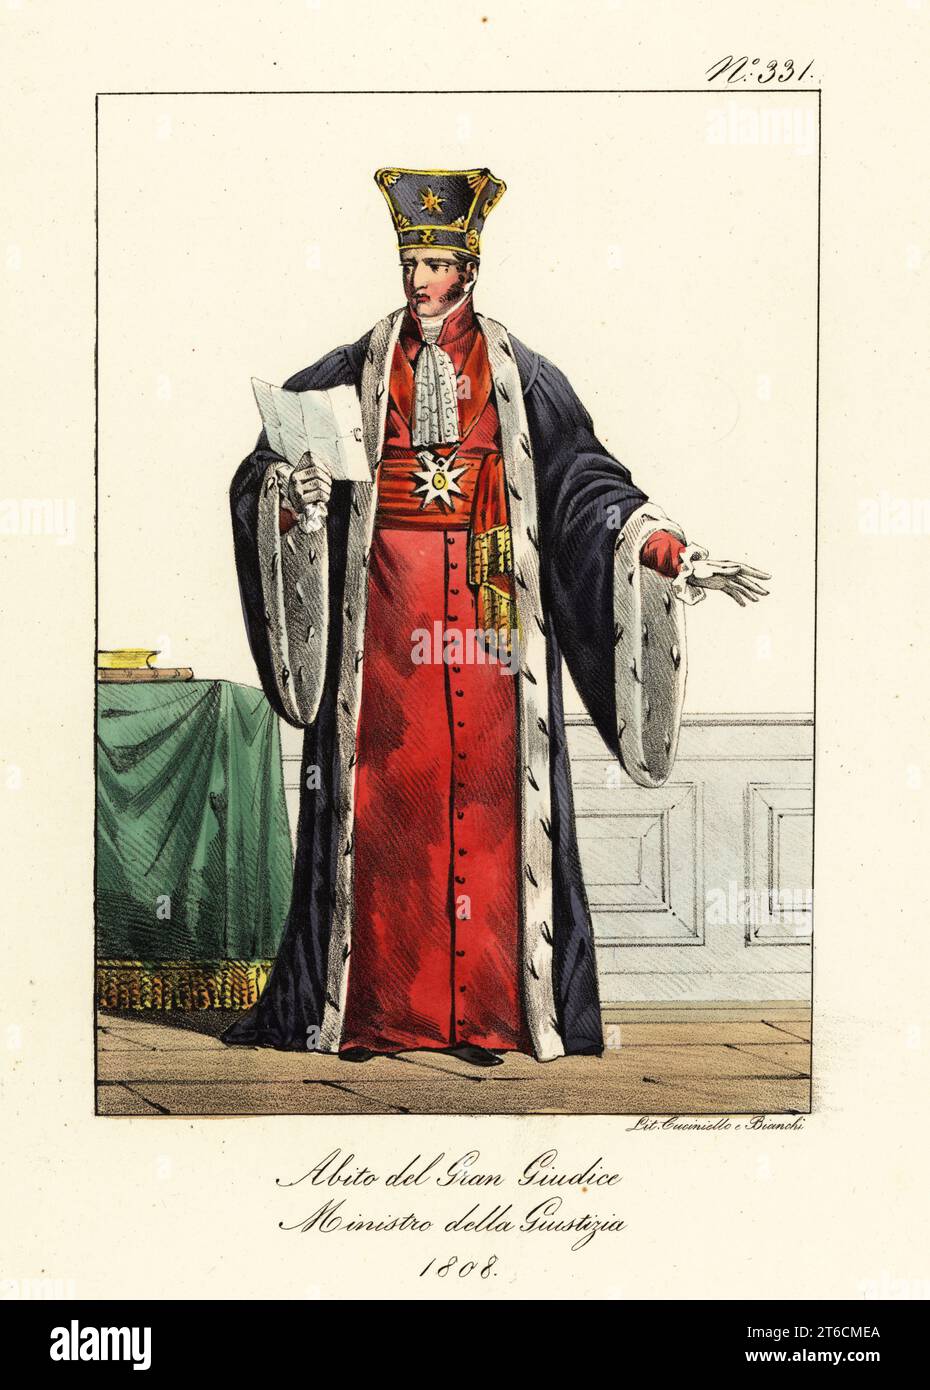 Costume of a French Chief Judge and Minister of Justice, during the First Empire, 1808. Based on a portrait of lawyer and politician Claude Ambroise Régnier, Duke of Massa, with the order of the Legion of Honour. Costume du Grand Juge. Ministre de la Justice. Handcoloured lithograph by Lorenzo Bianchi and Domenico Cuciniello after Hippolyte Lecomte from Costumi civili e militari della monarchia francese dal 1200 al 1820, Naples, 1825. Italian edition of Lecomtes Civilian and military costumes of the French monarchy from 1200 to 1820. Stock Photo